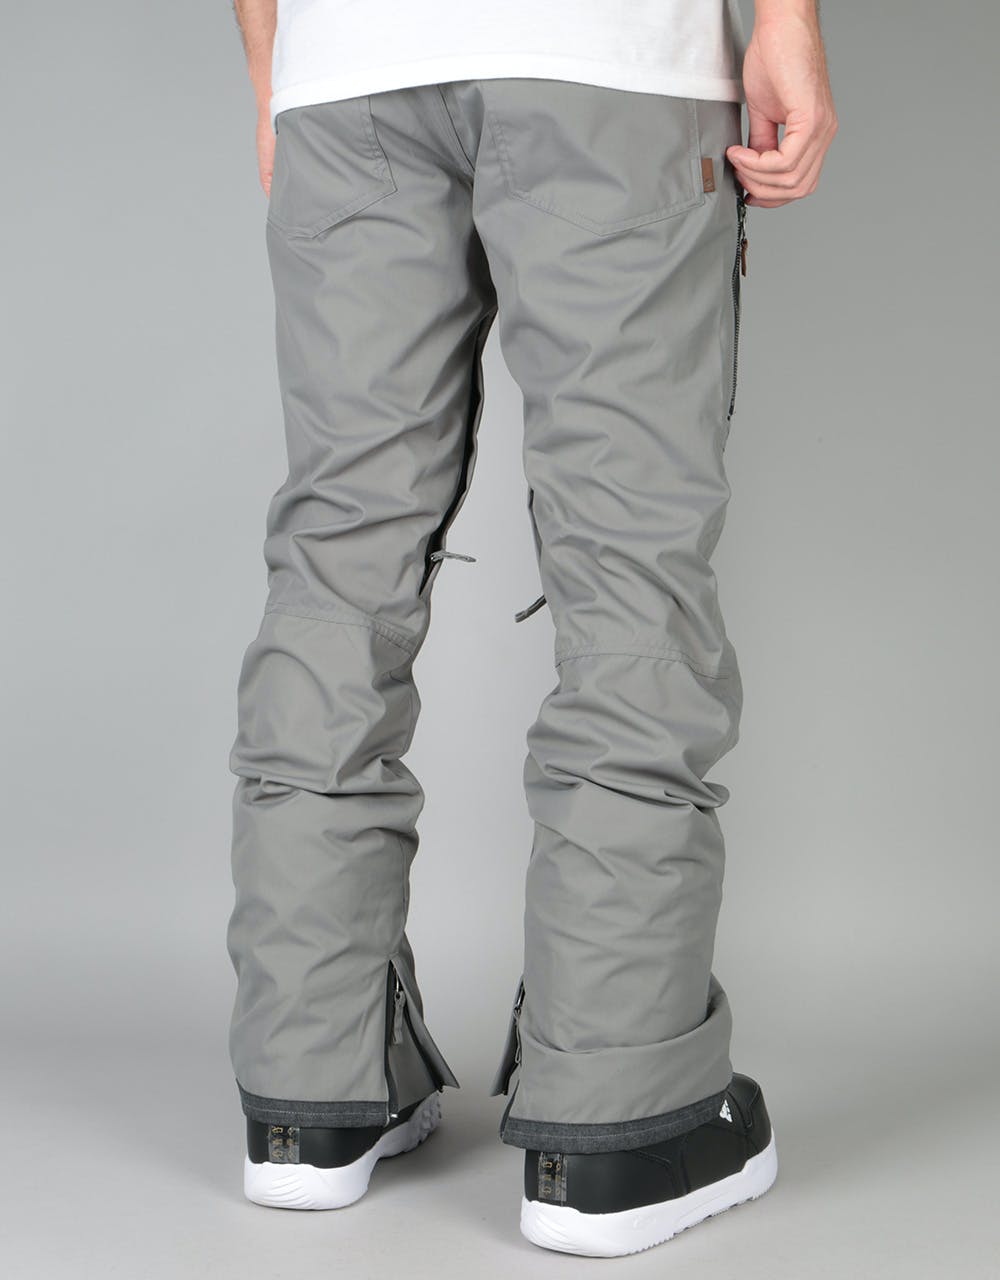 Sessions Agent Snowboard Pants - Charcoal